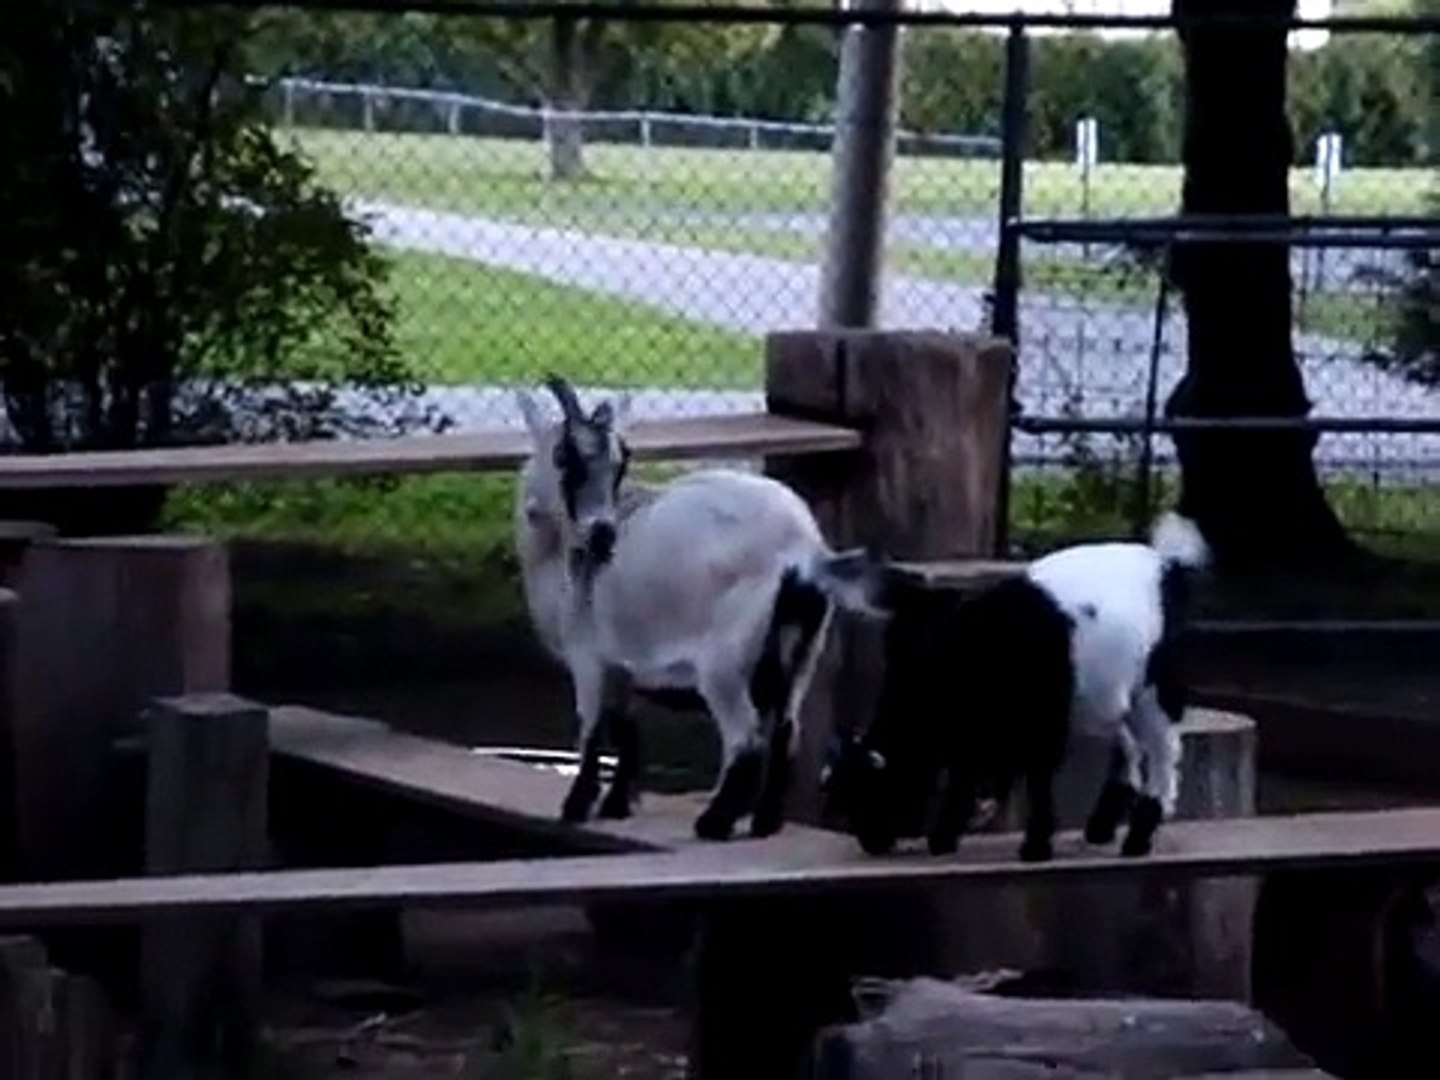 goat rams other goat